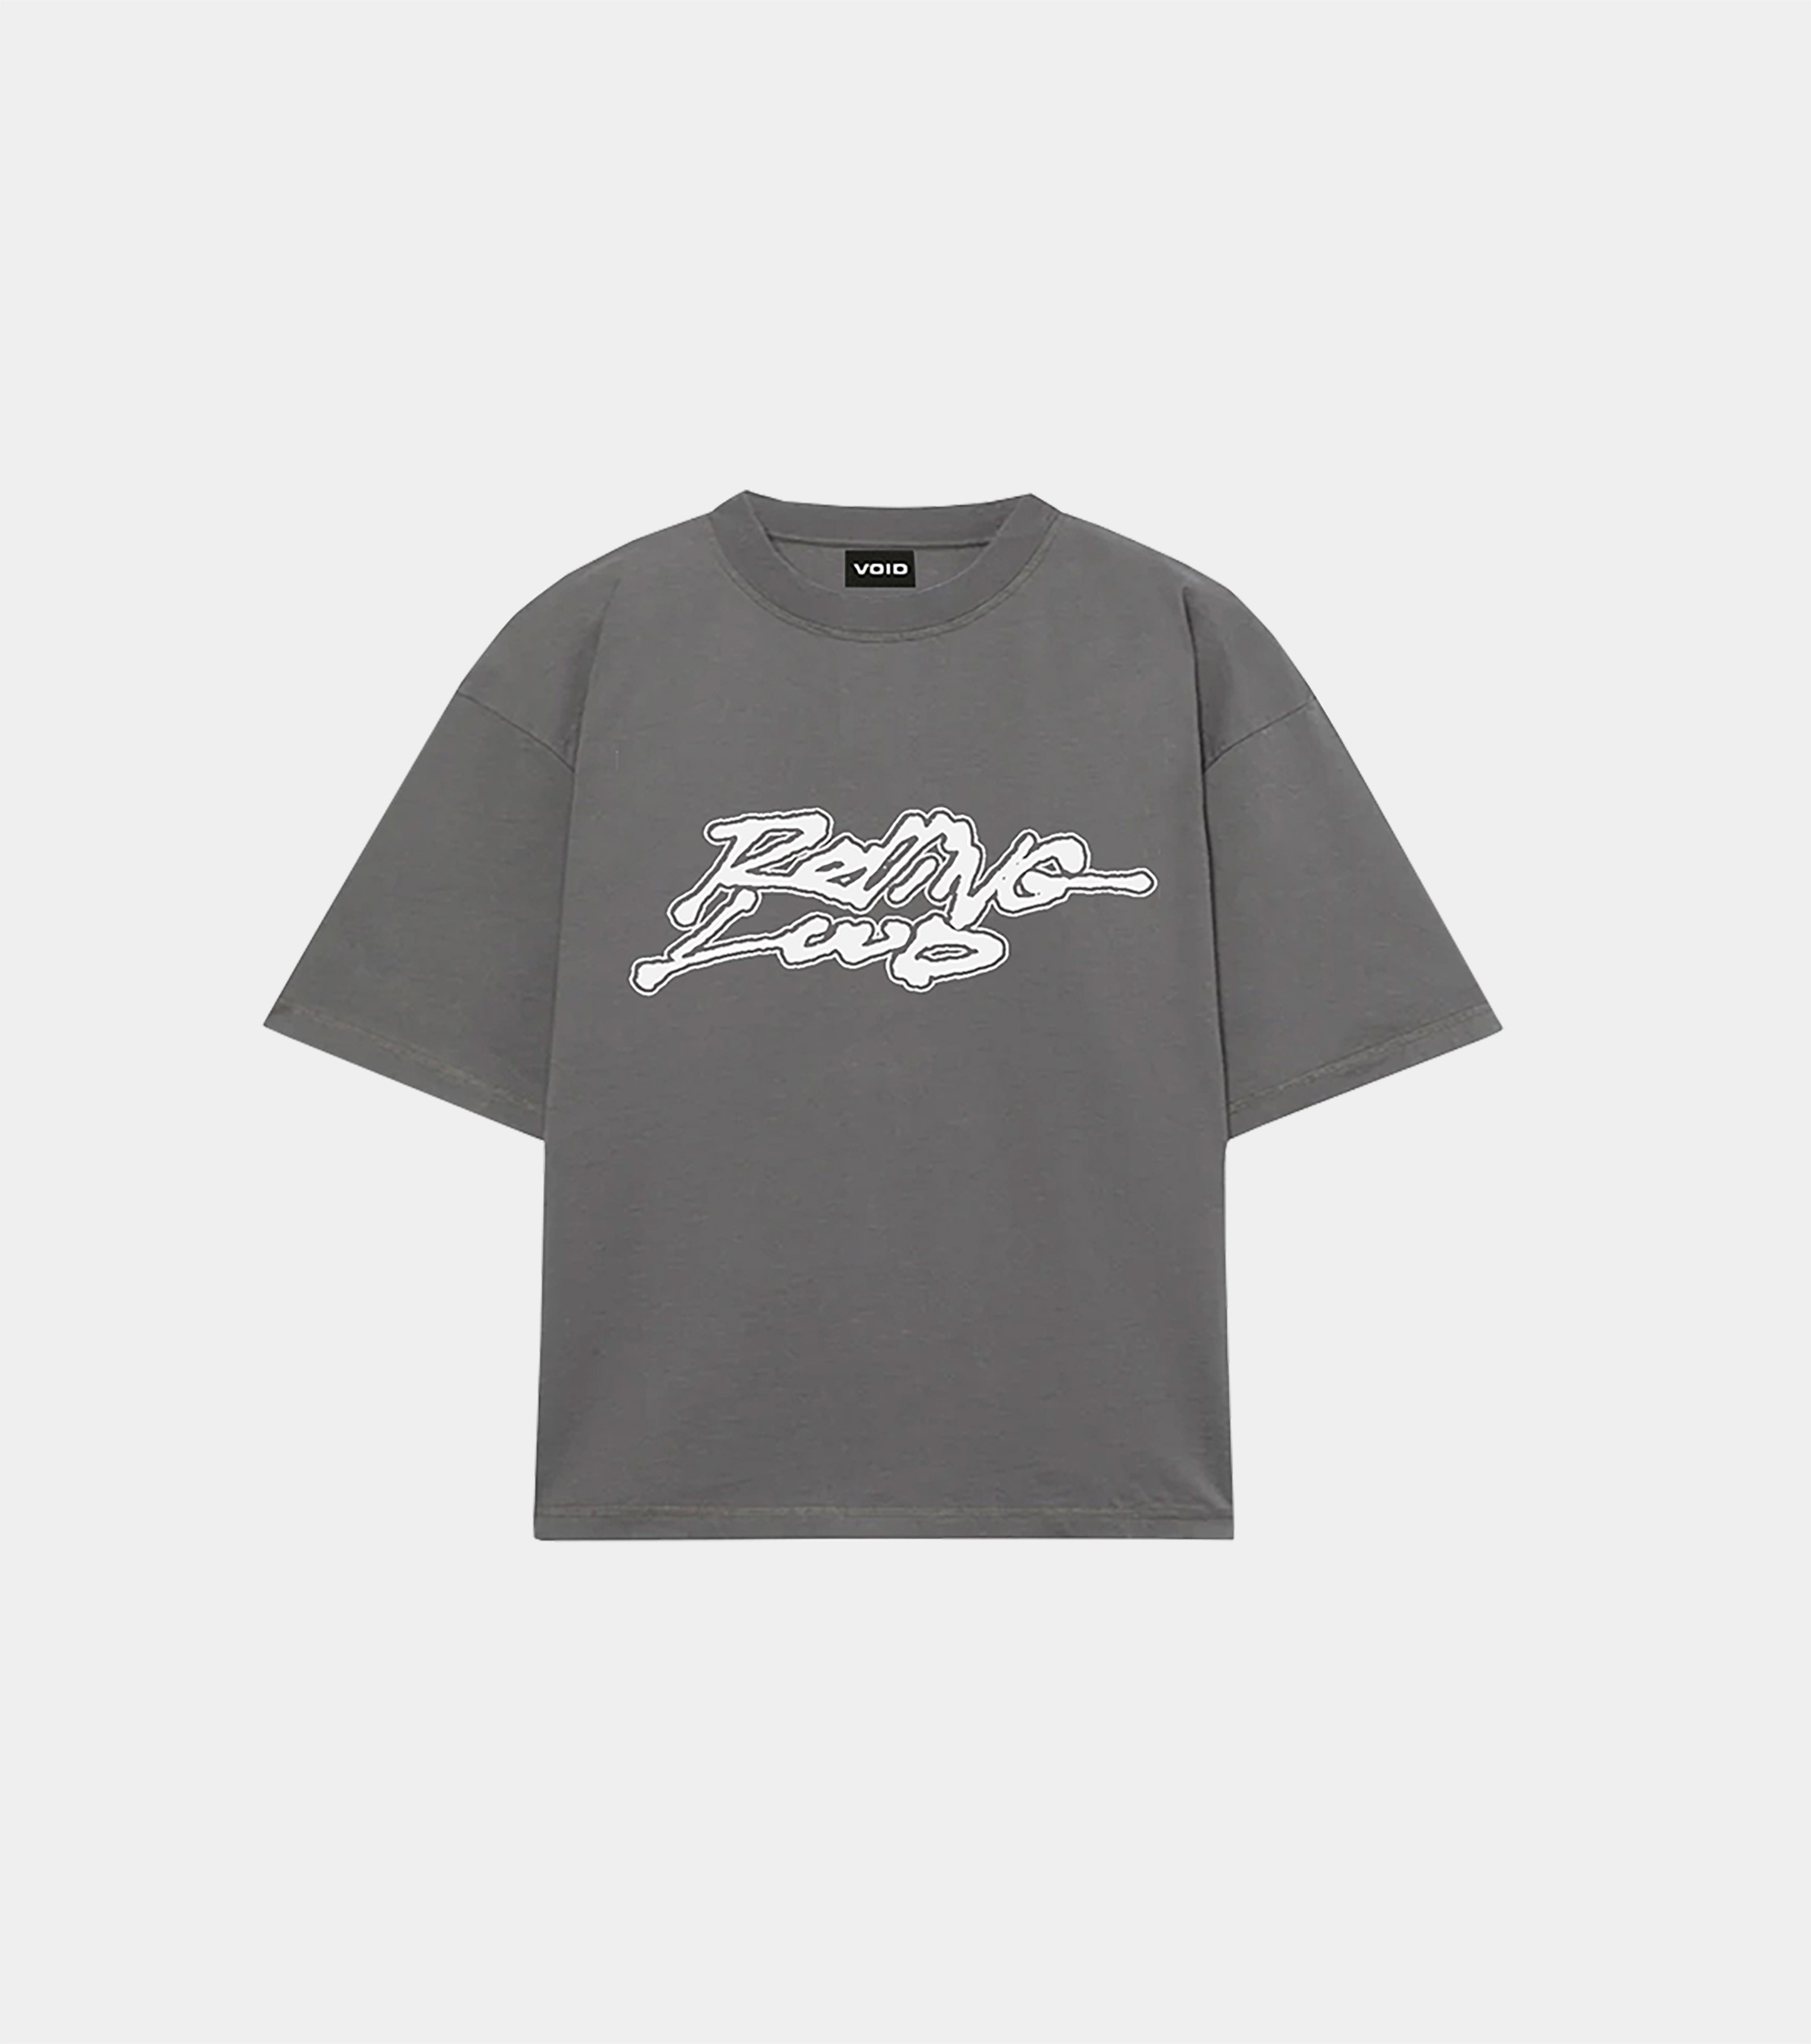 VOID Rolling Loud Washed Oversize Premium Tee